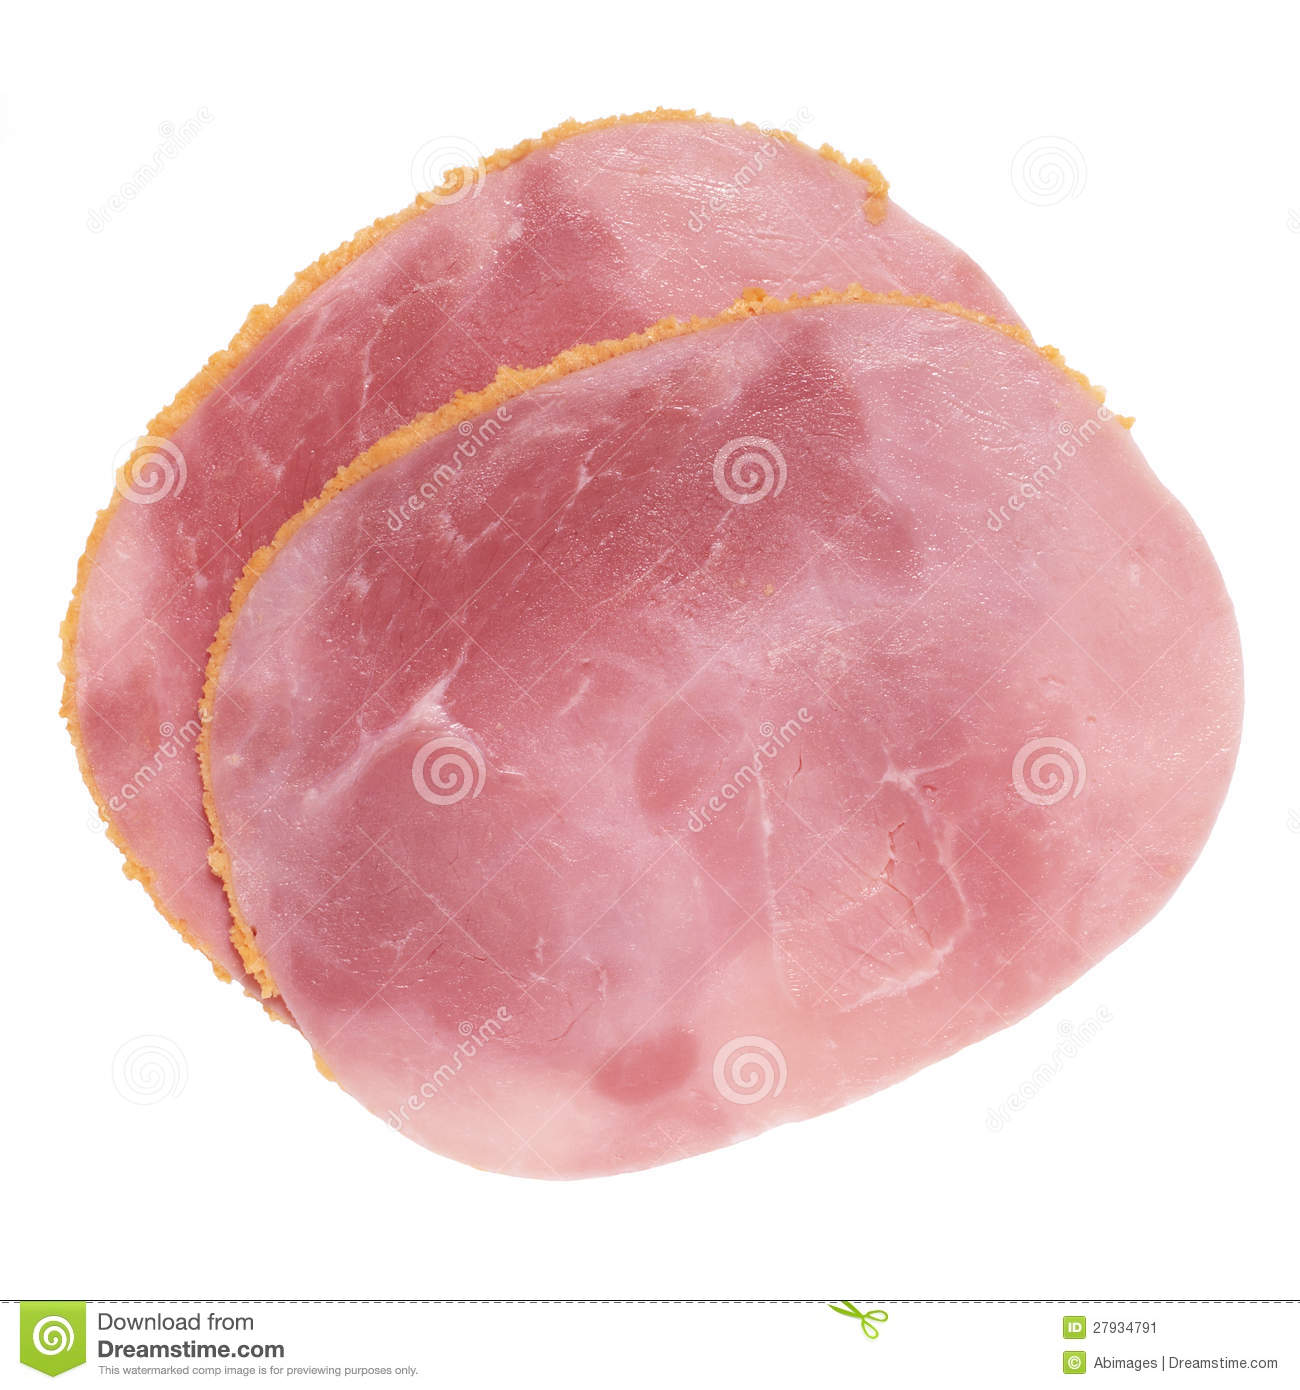 More Similar Stock Images Of   Breaded Ham Slices